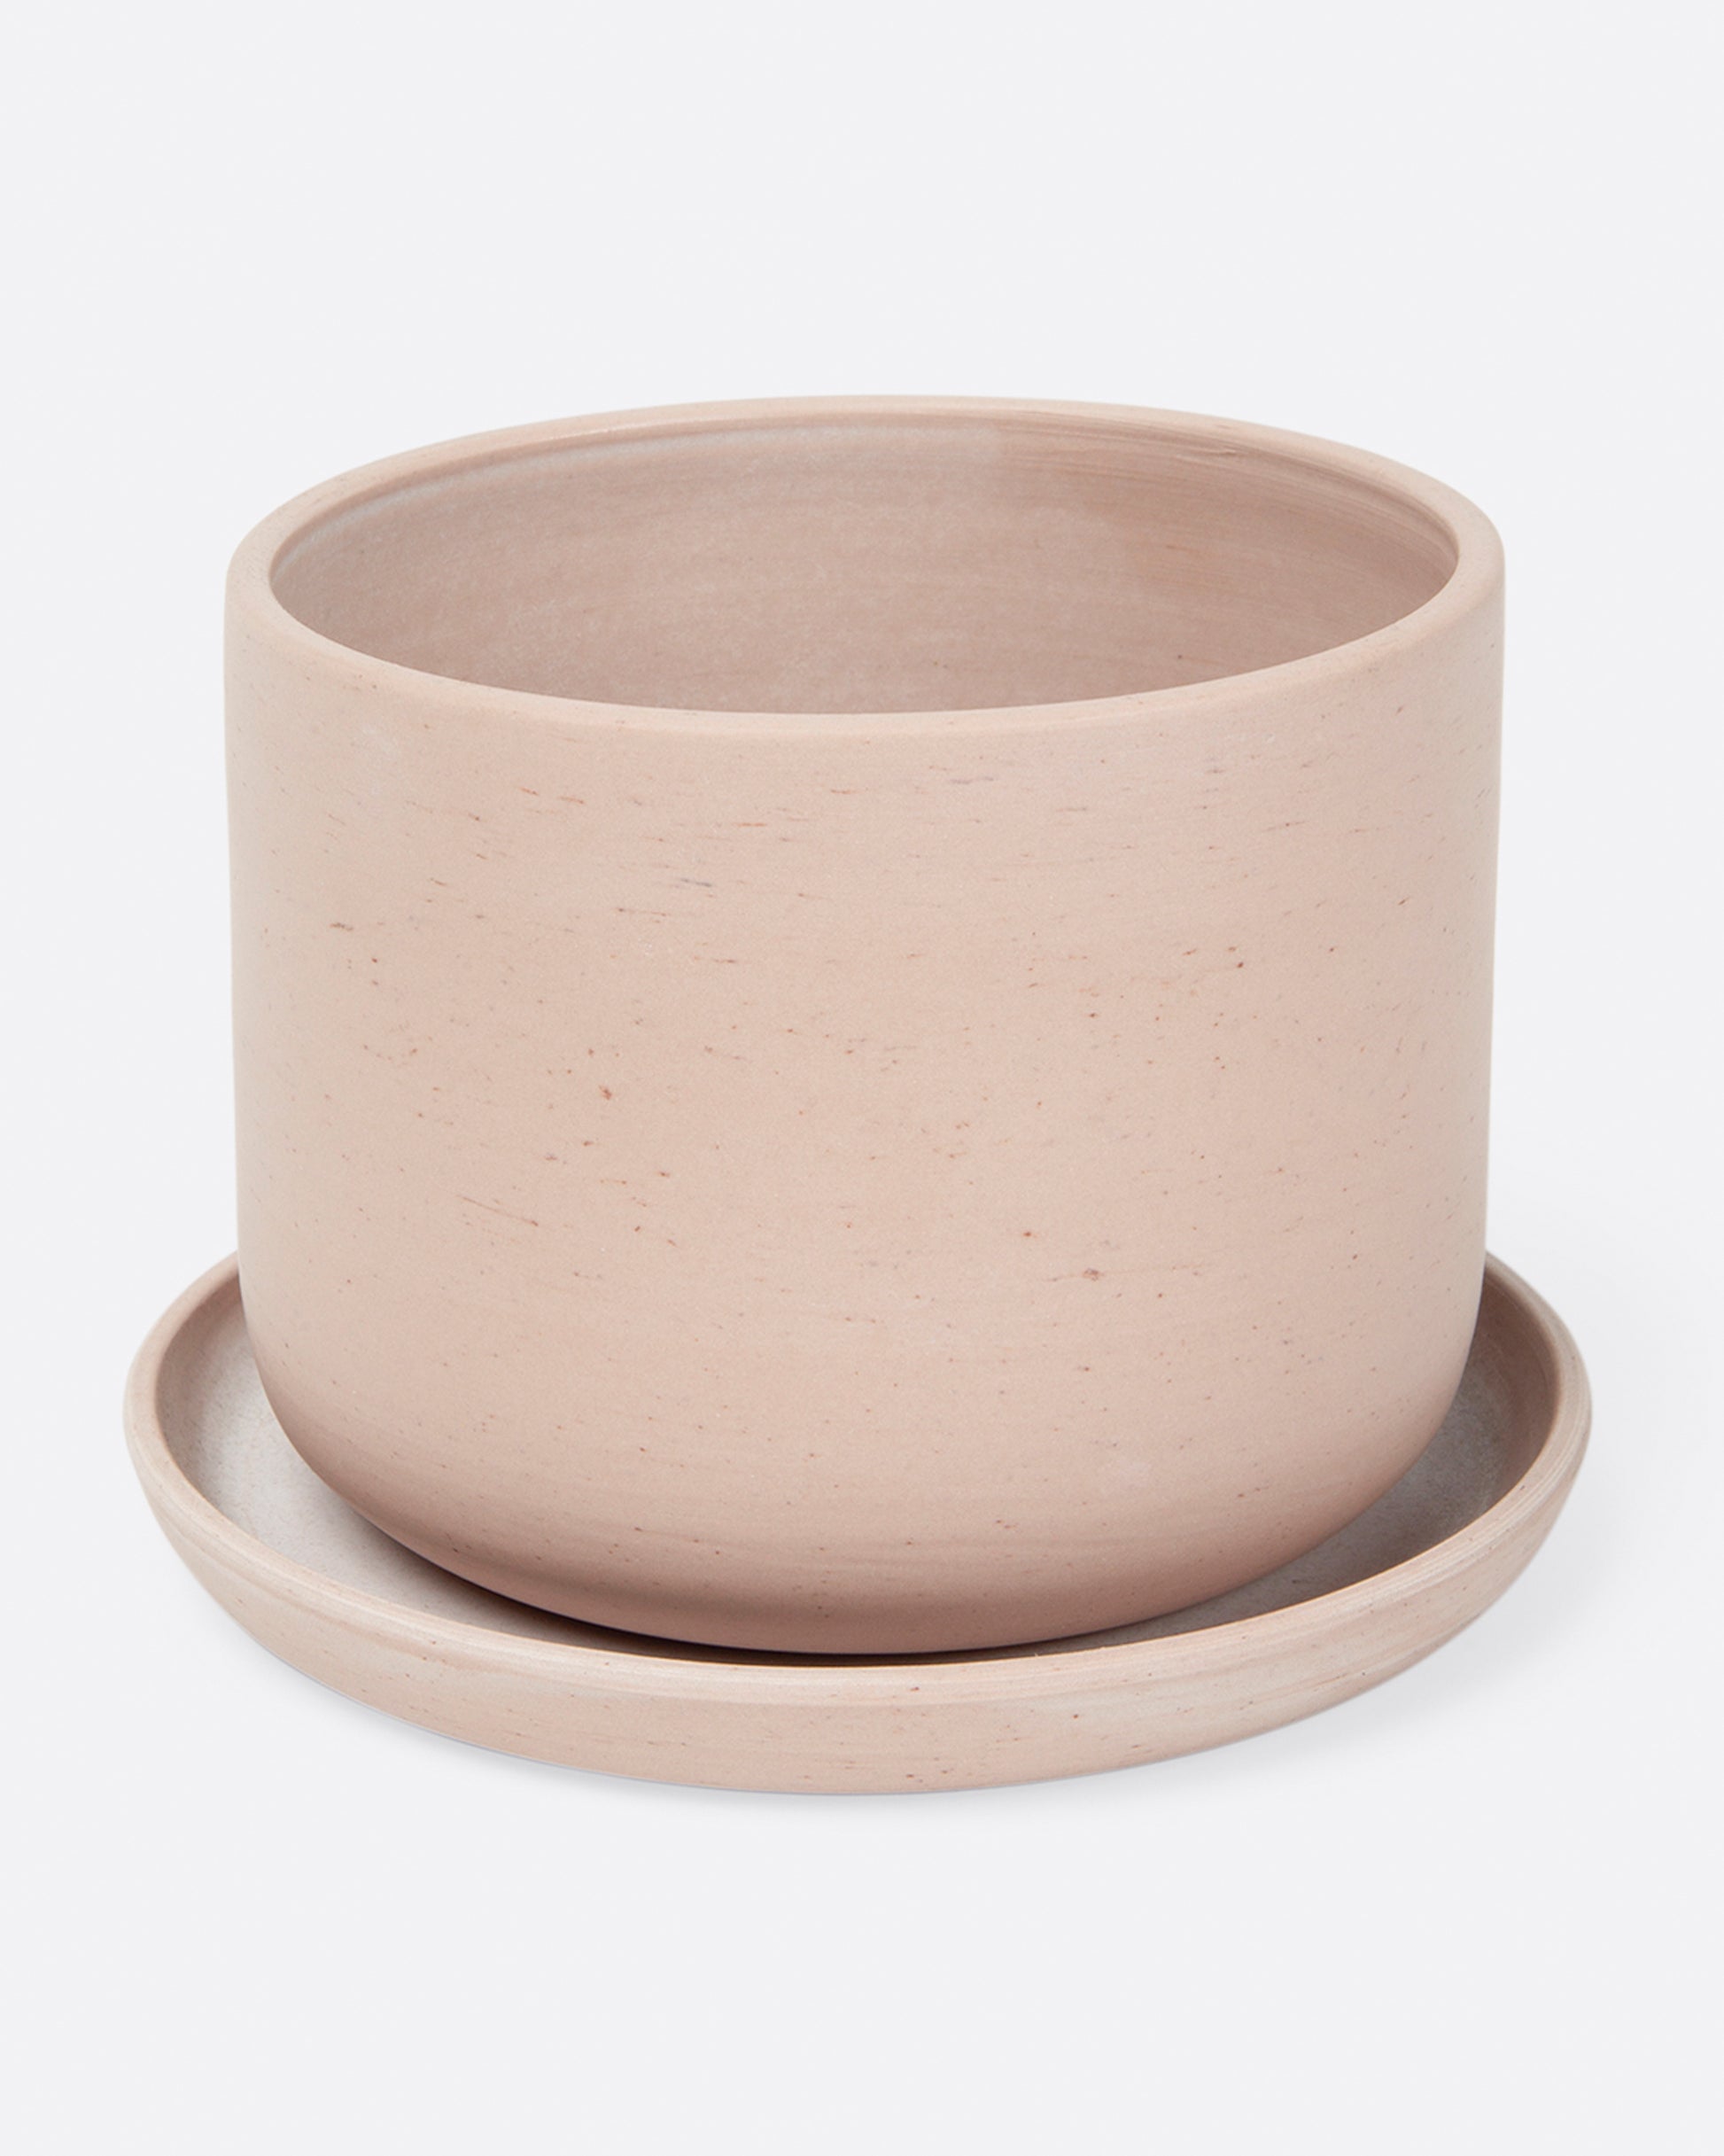 Smooth, matte, tinted porcelain planters with matching saucers.